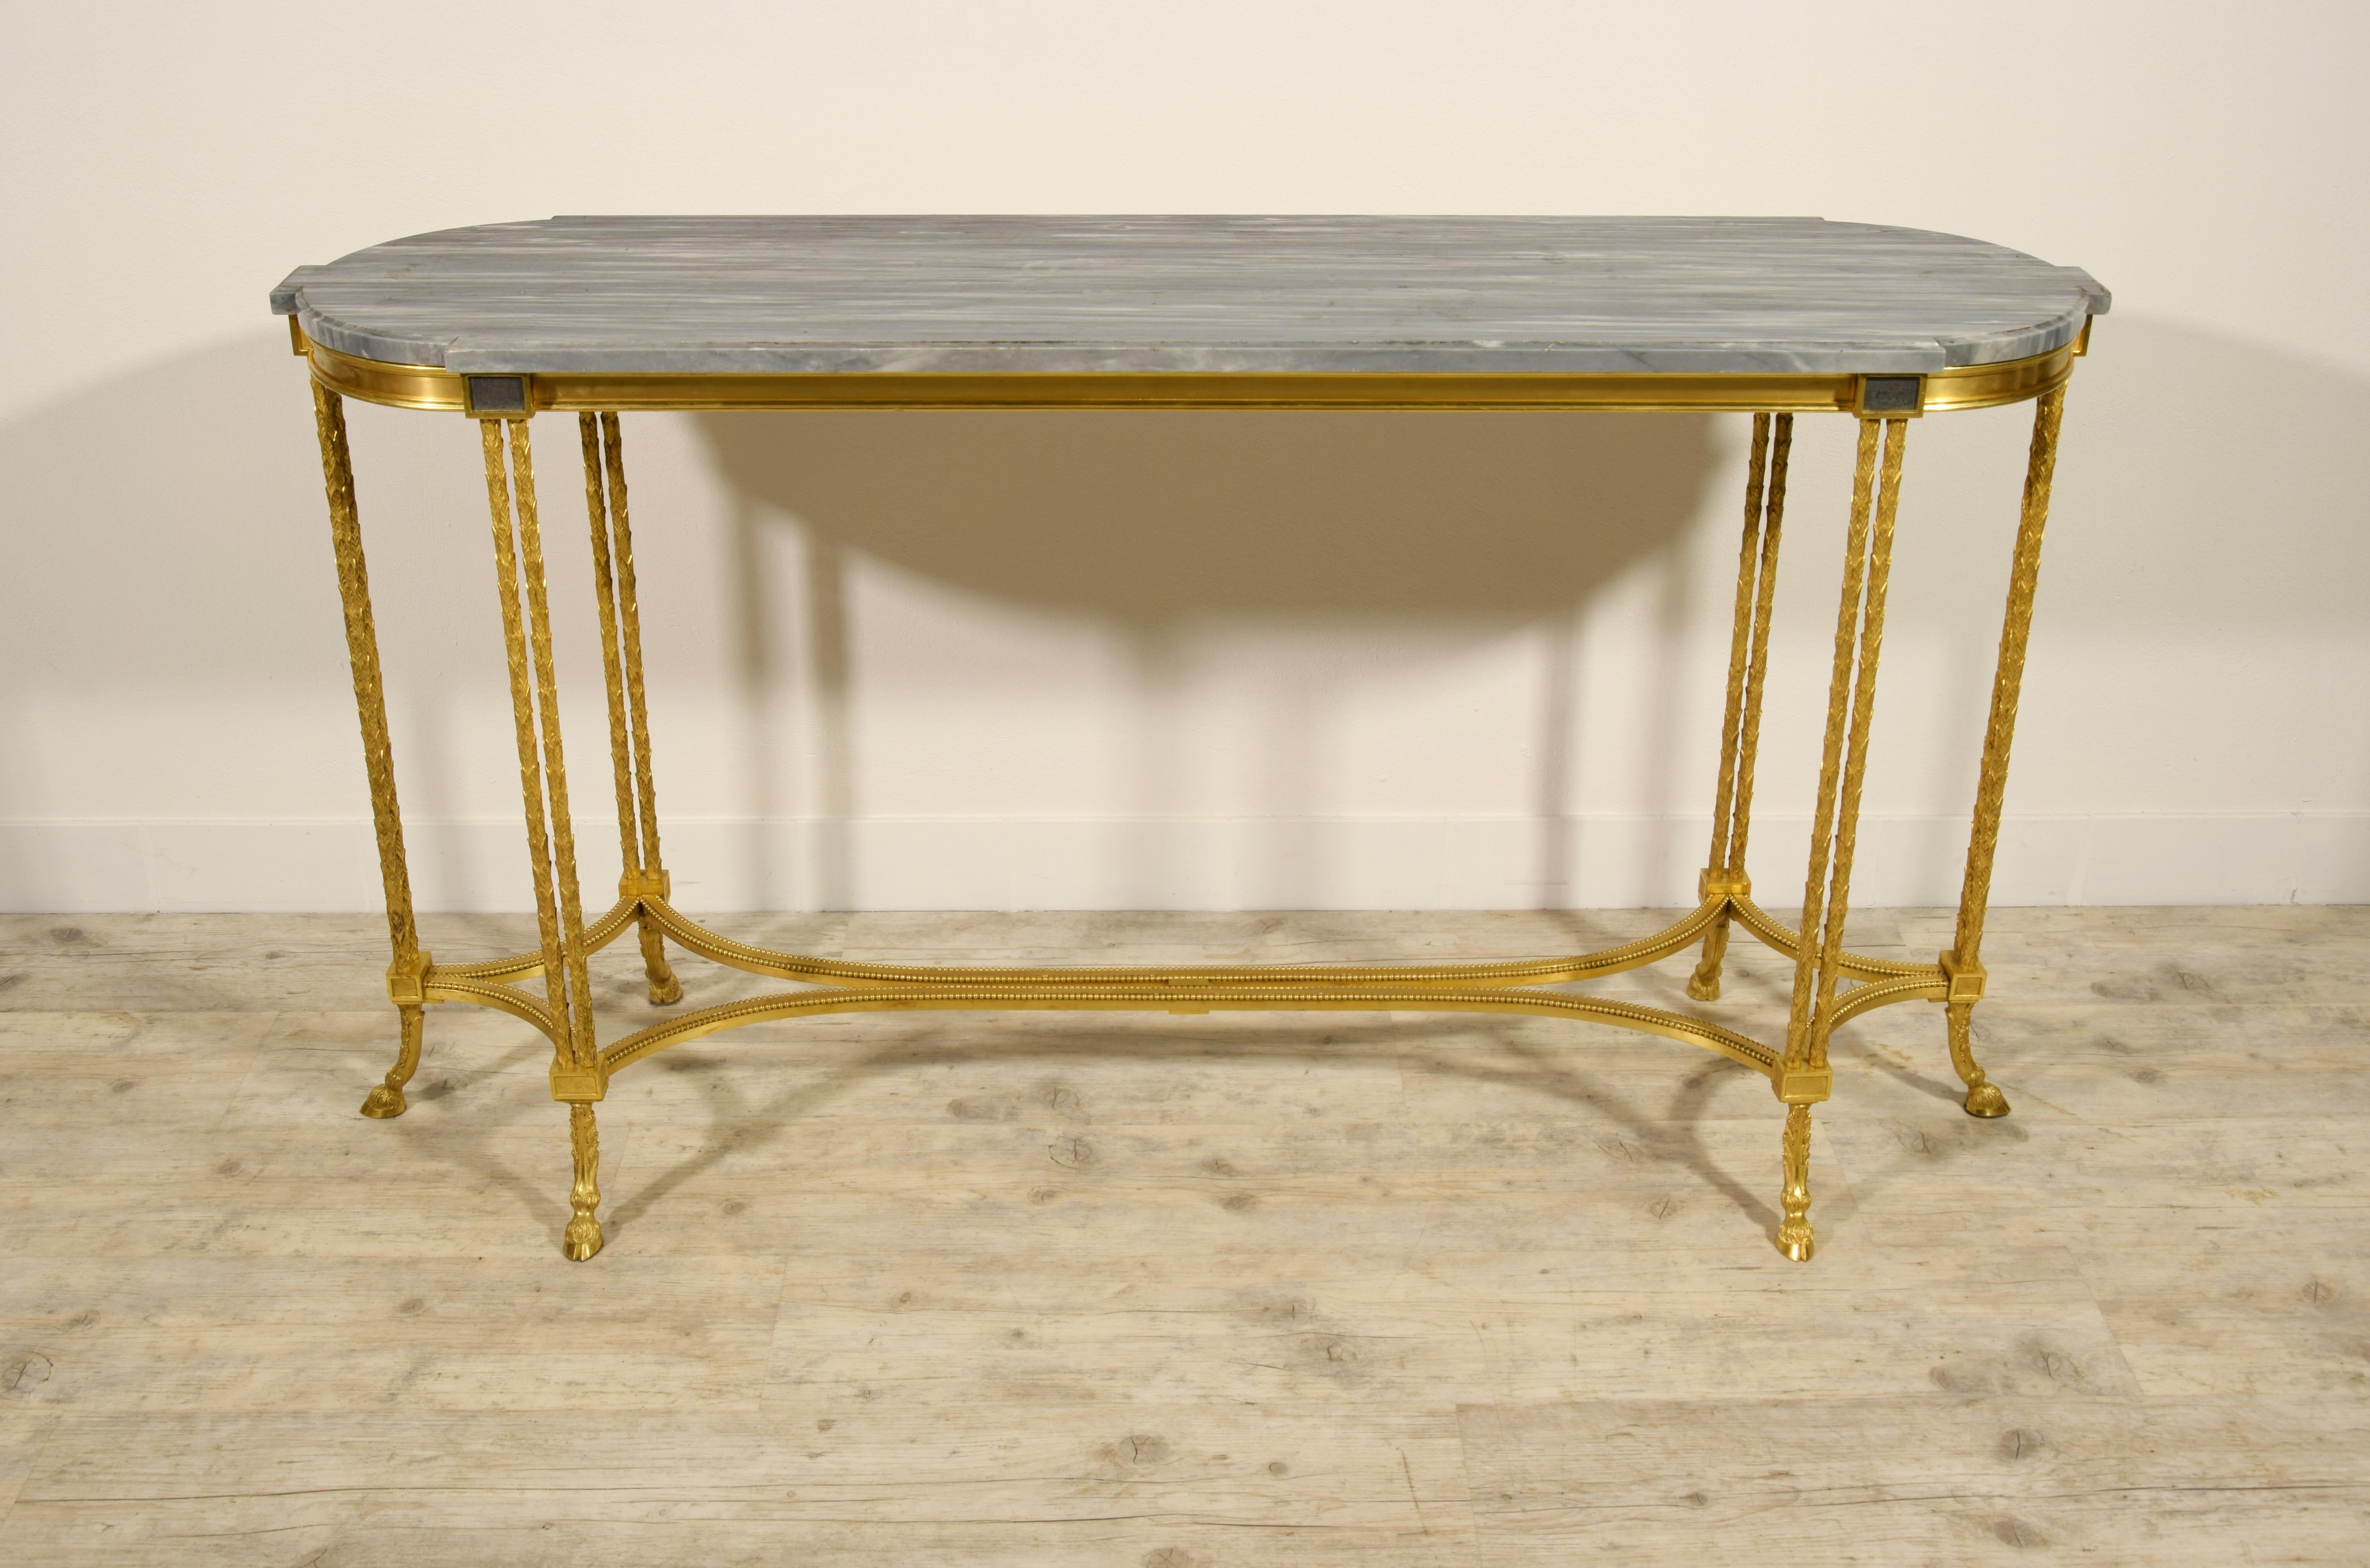 20th century, French Gilt Bronze Console Table by Maison Baguès  For Sale 1